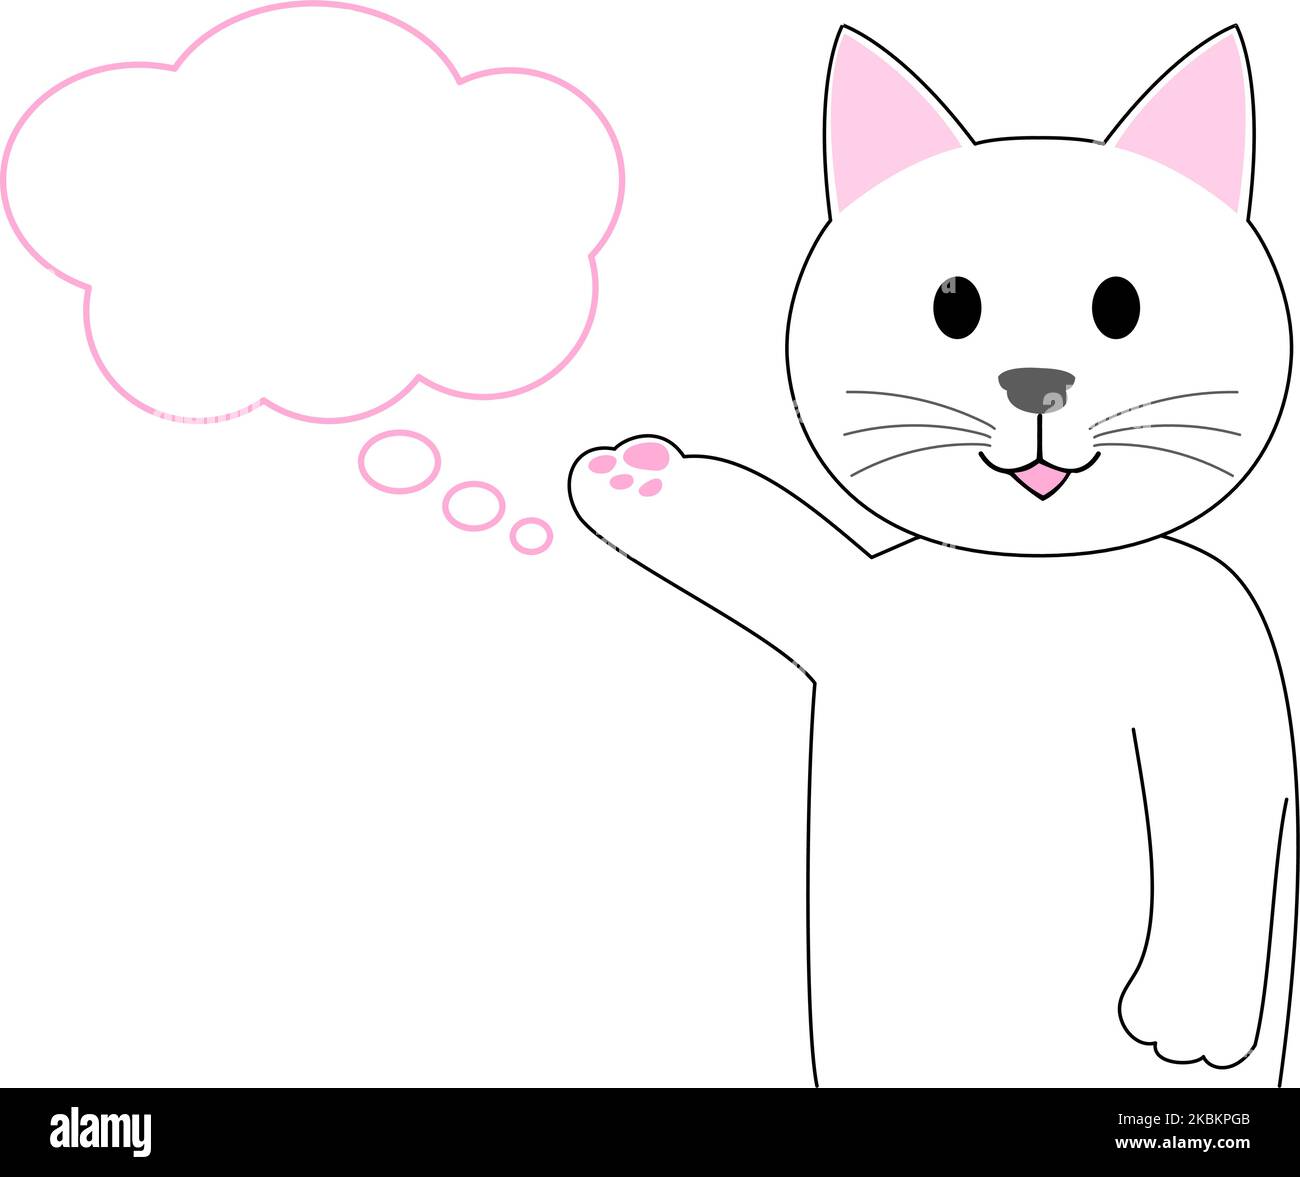 A White Kitten introducing with speech bubble Stock Photo